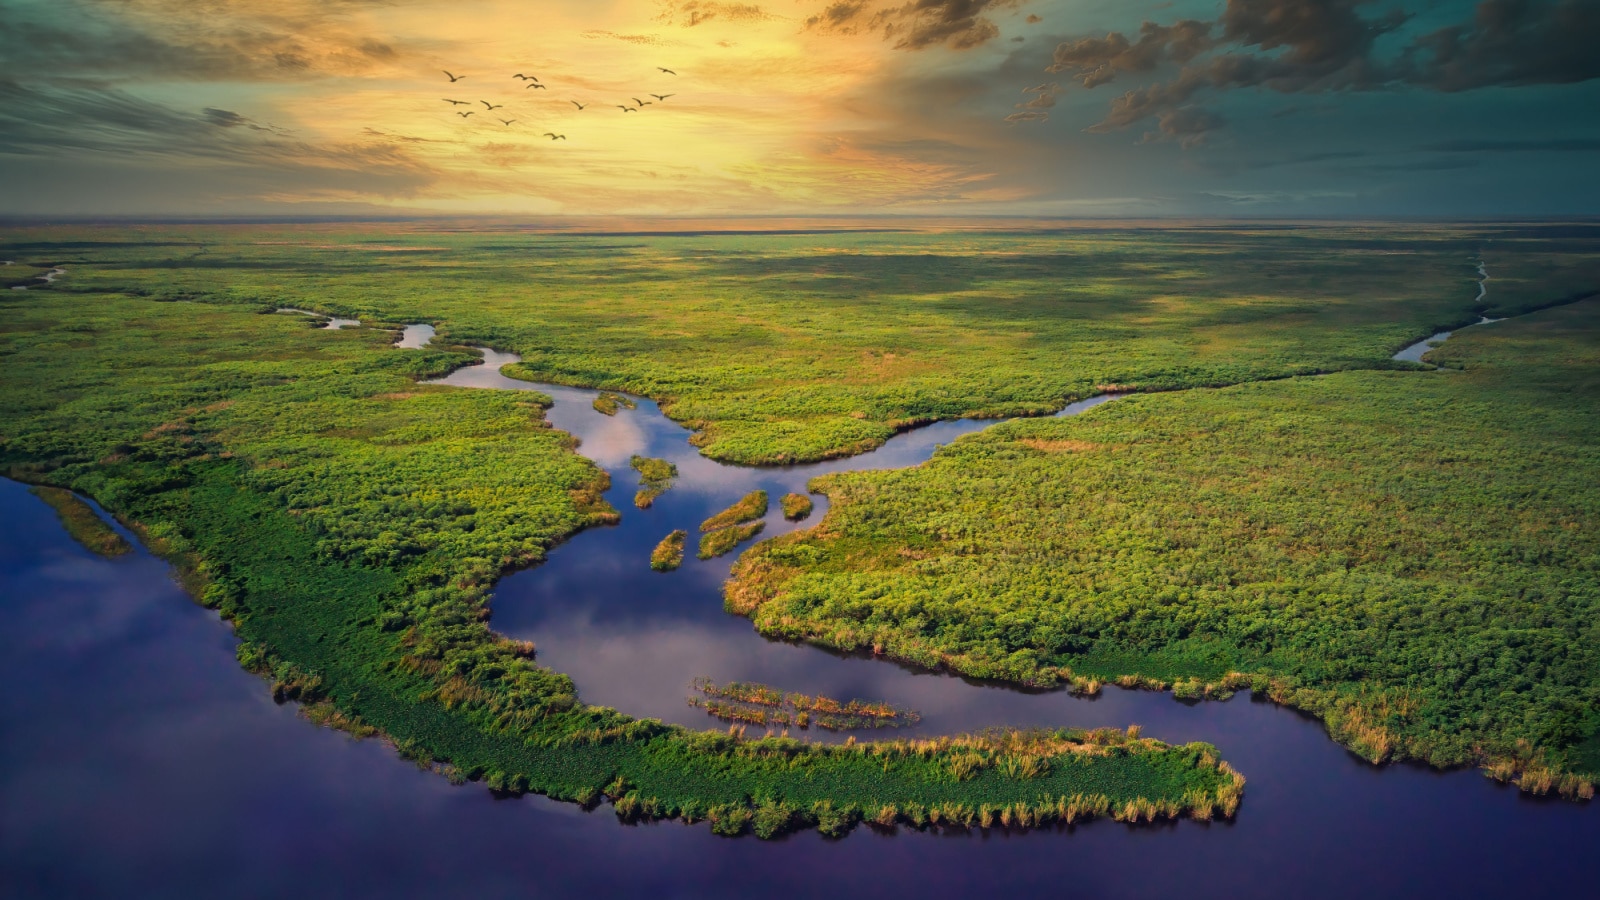 Aerial View of Florida Everglades Golden Hour Sunset